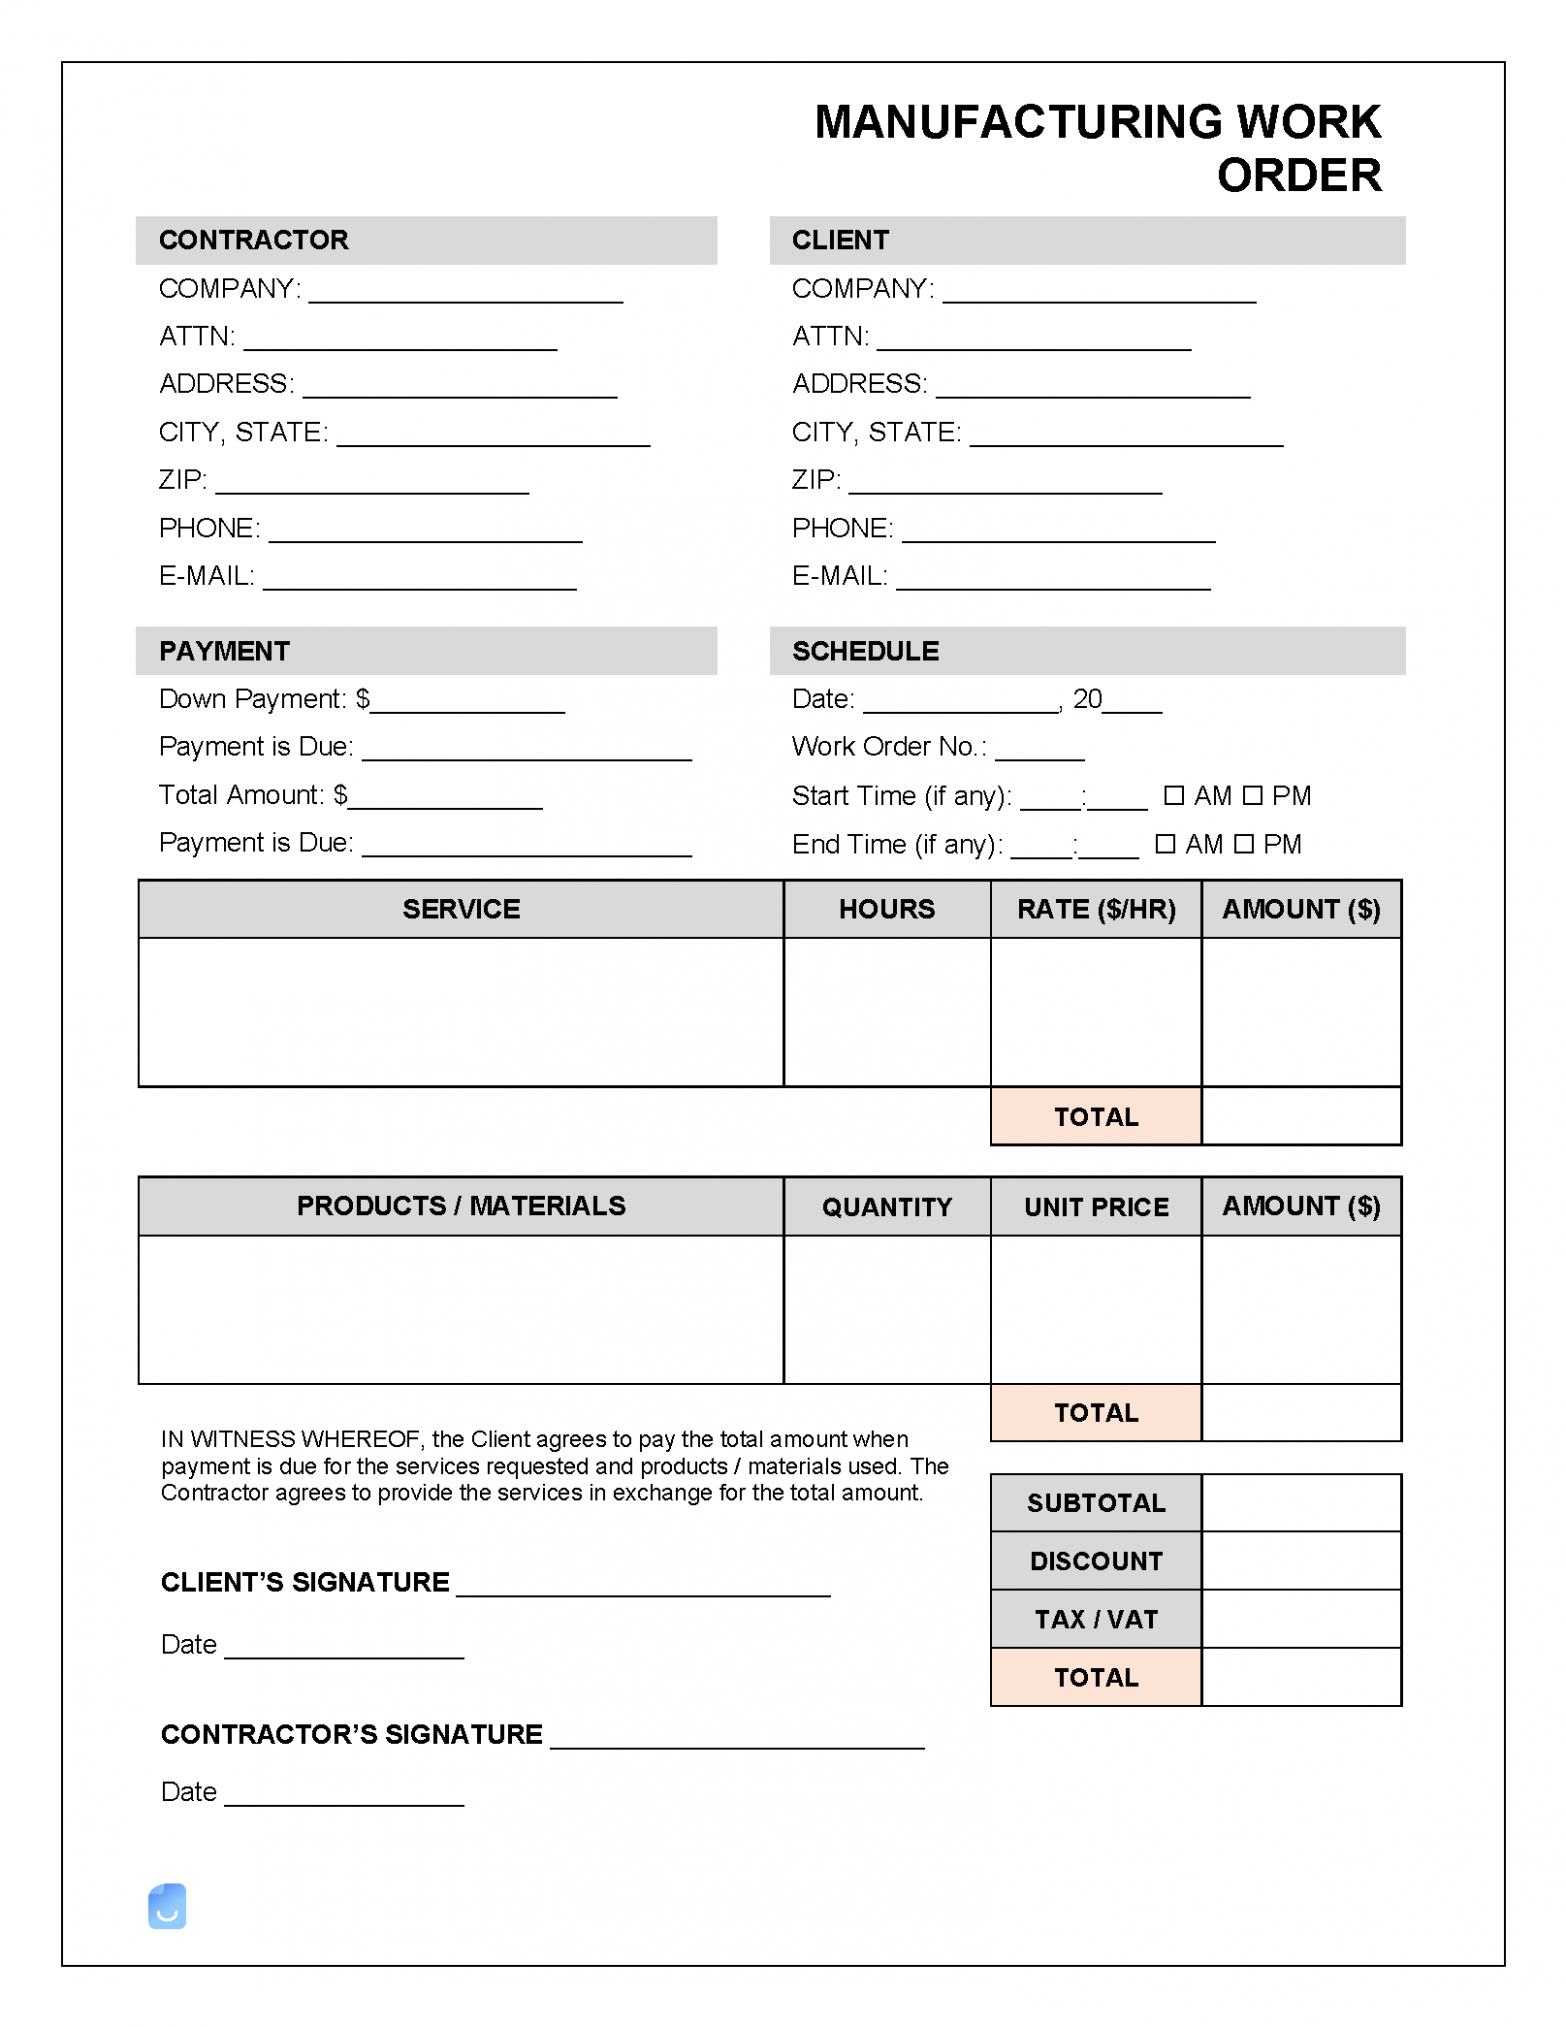 Free  Manufacturing Work Order Template  Invoice Maker Excel